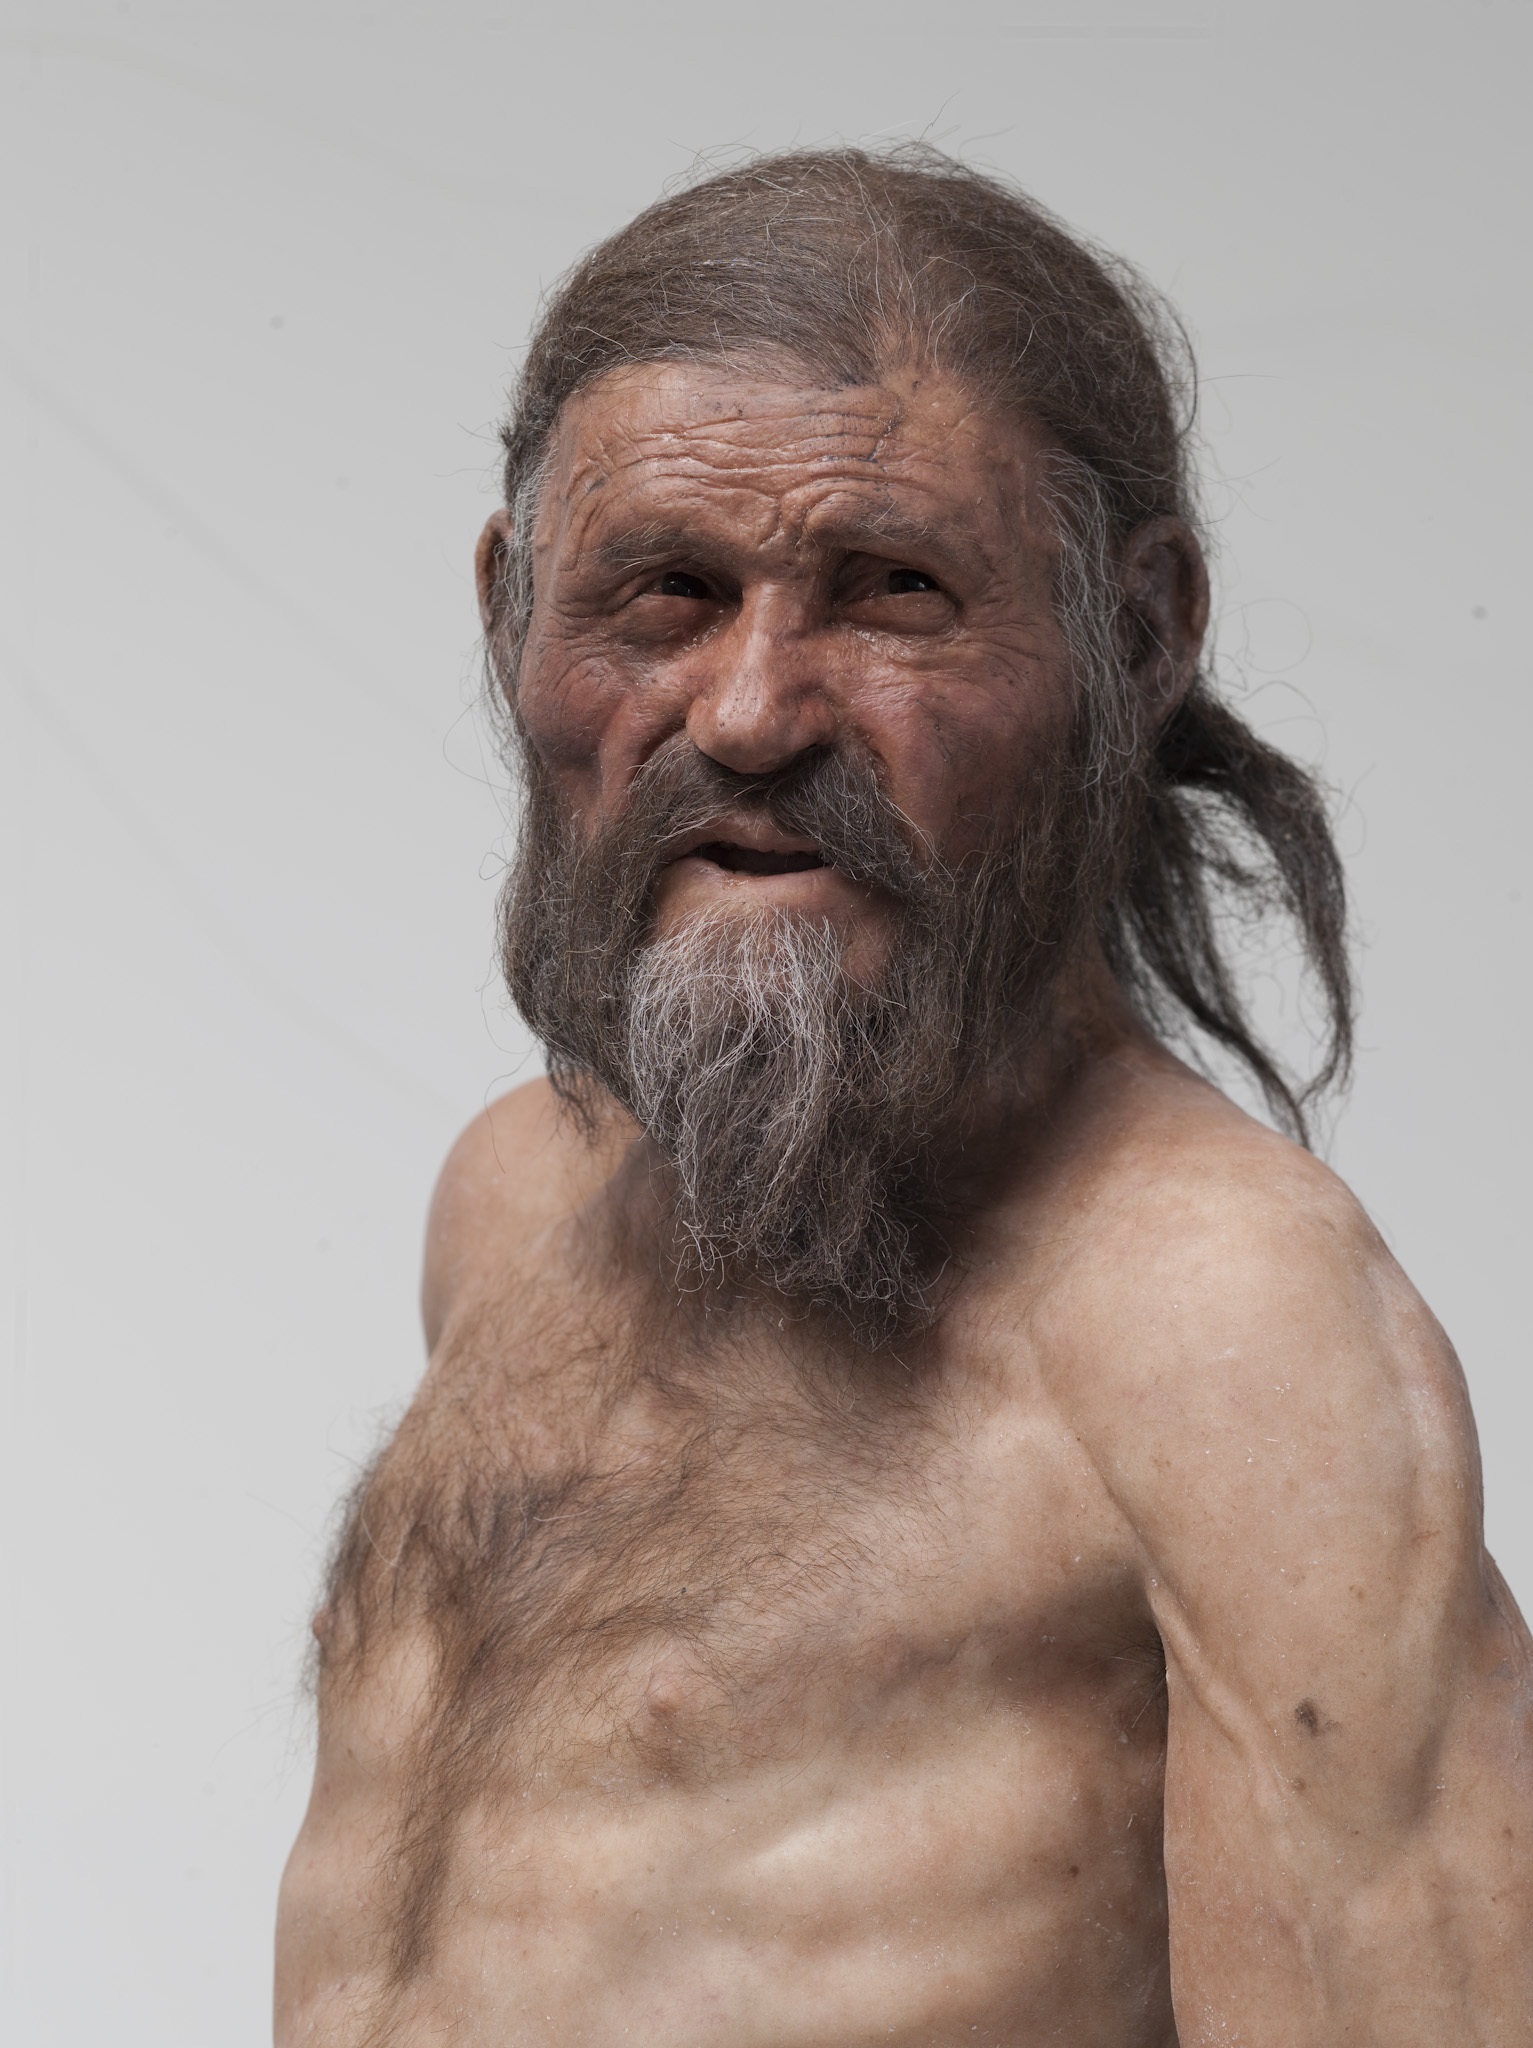 Iceman’s Stomach Bug Gives Clues To Humans’ Spread Into Europe